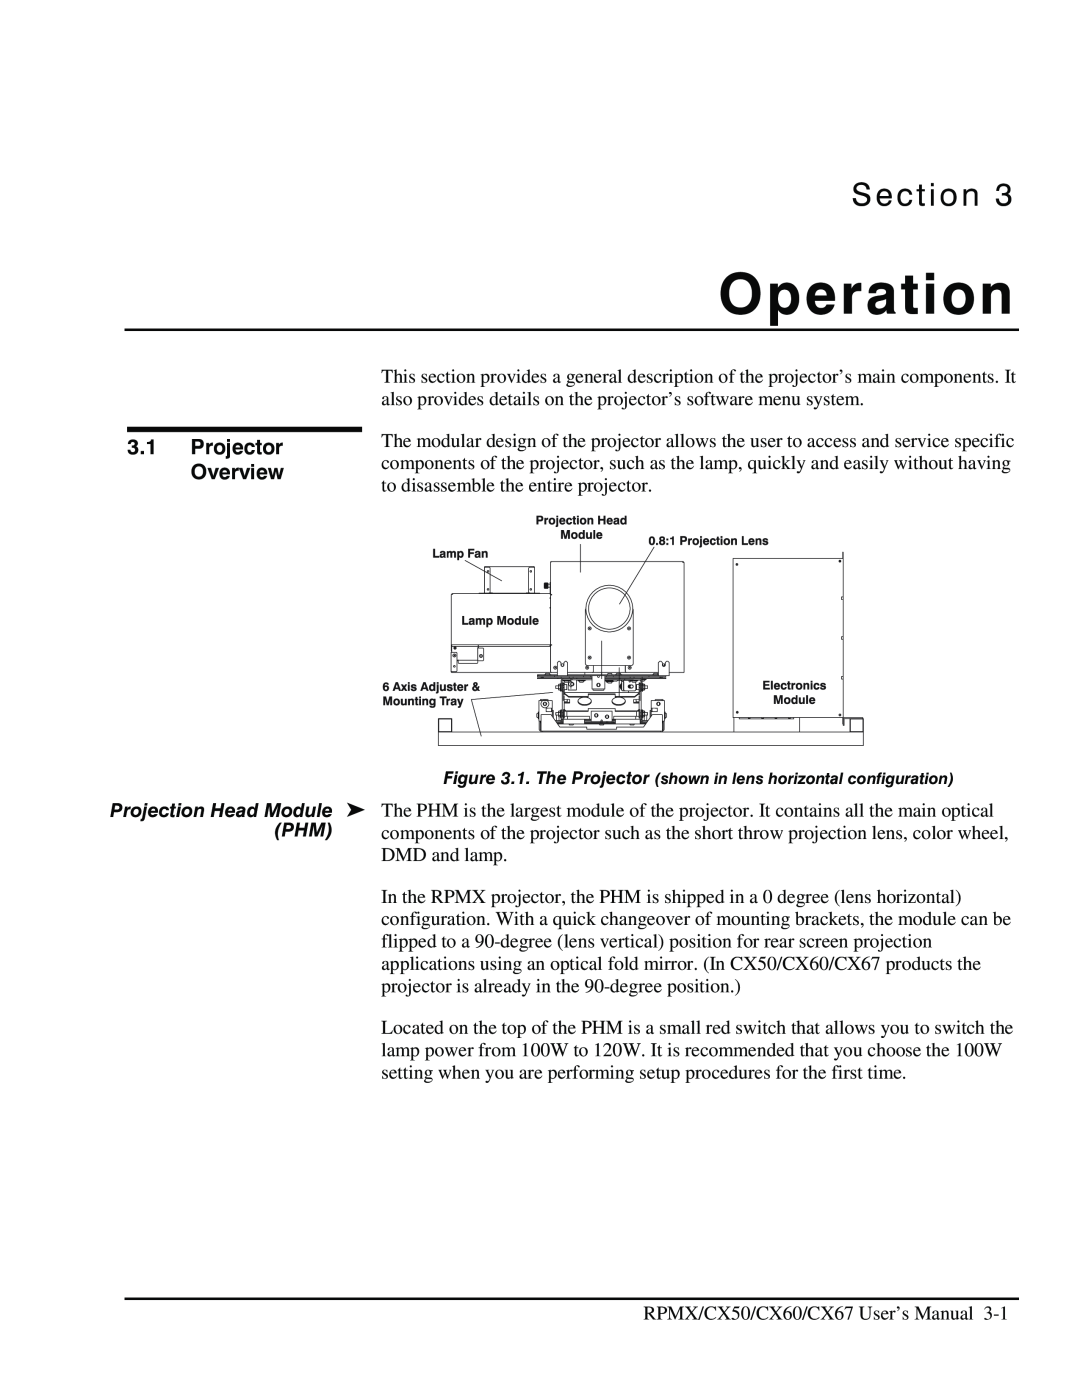 Christie Digital Systems CX60, CX50, CX67 user manual Operation, Projector Overview, Section 